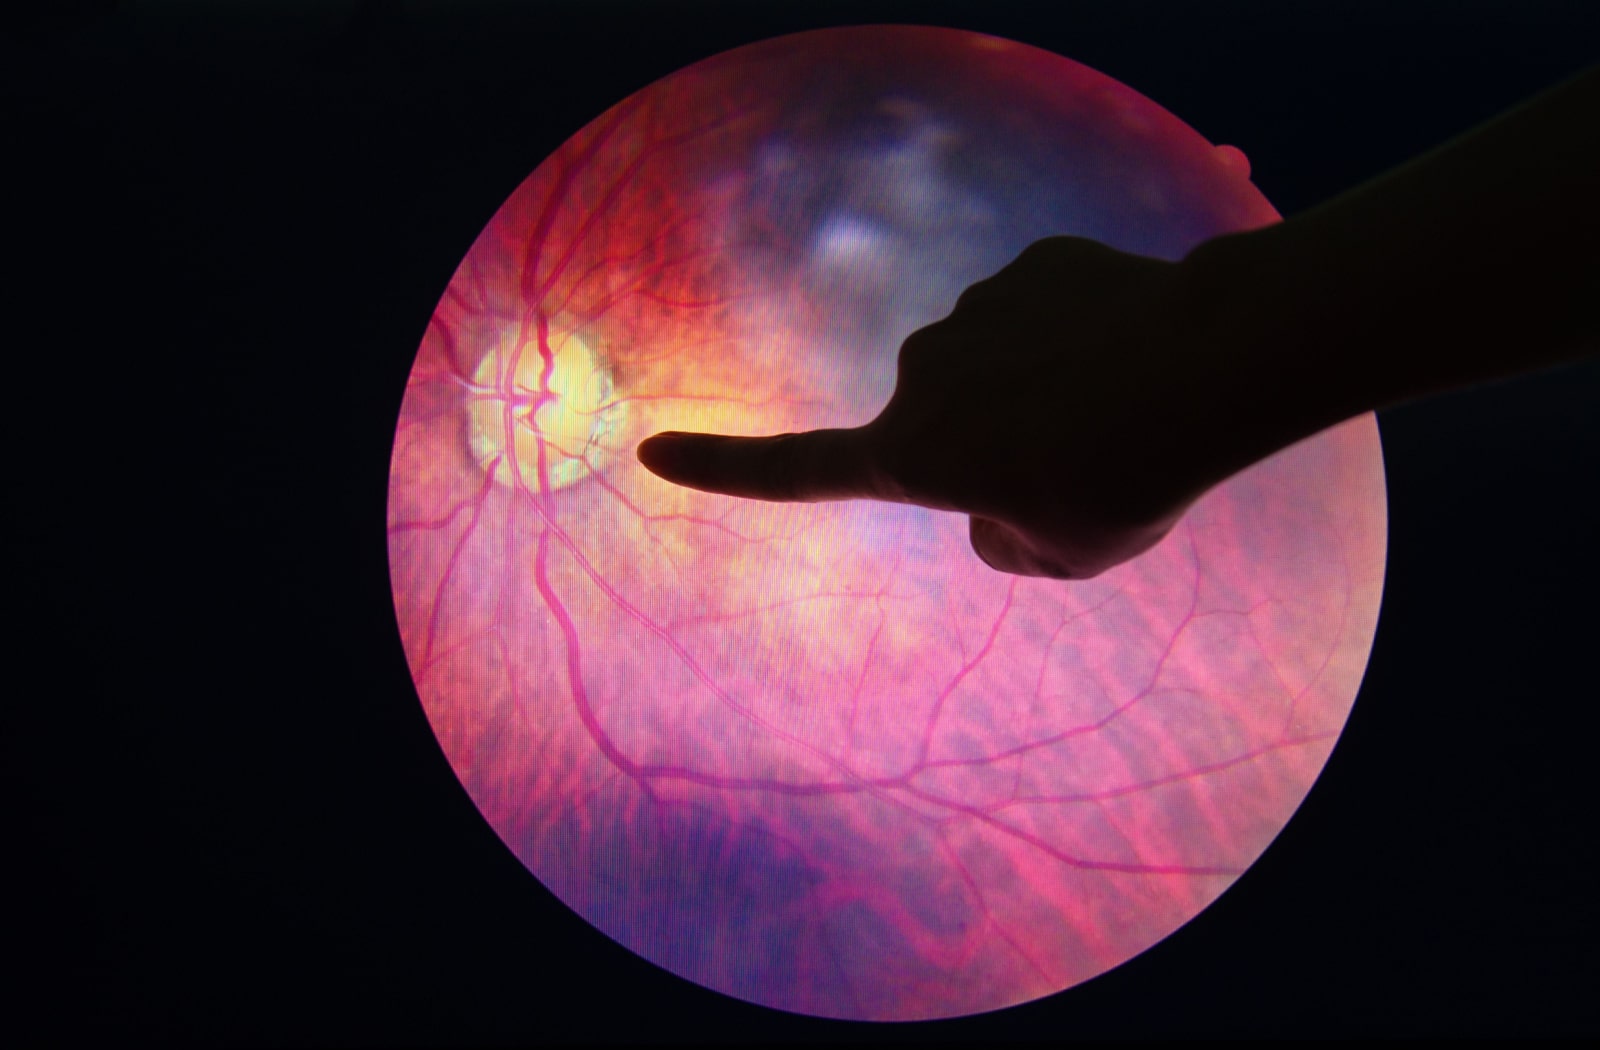 An optometrist pointing to the retina and macula on a digital scan of a patient's eye